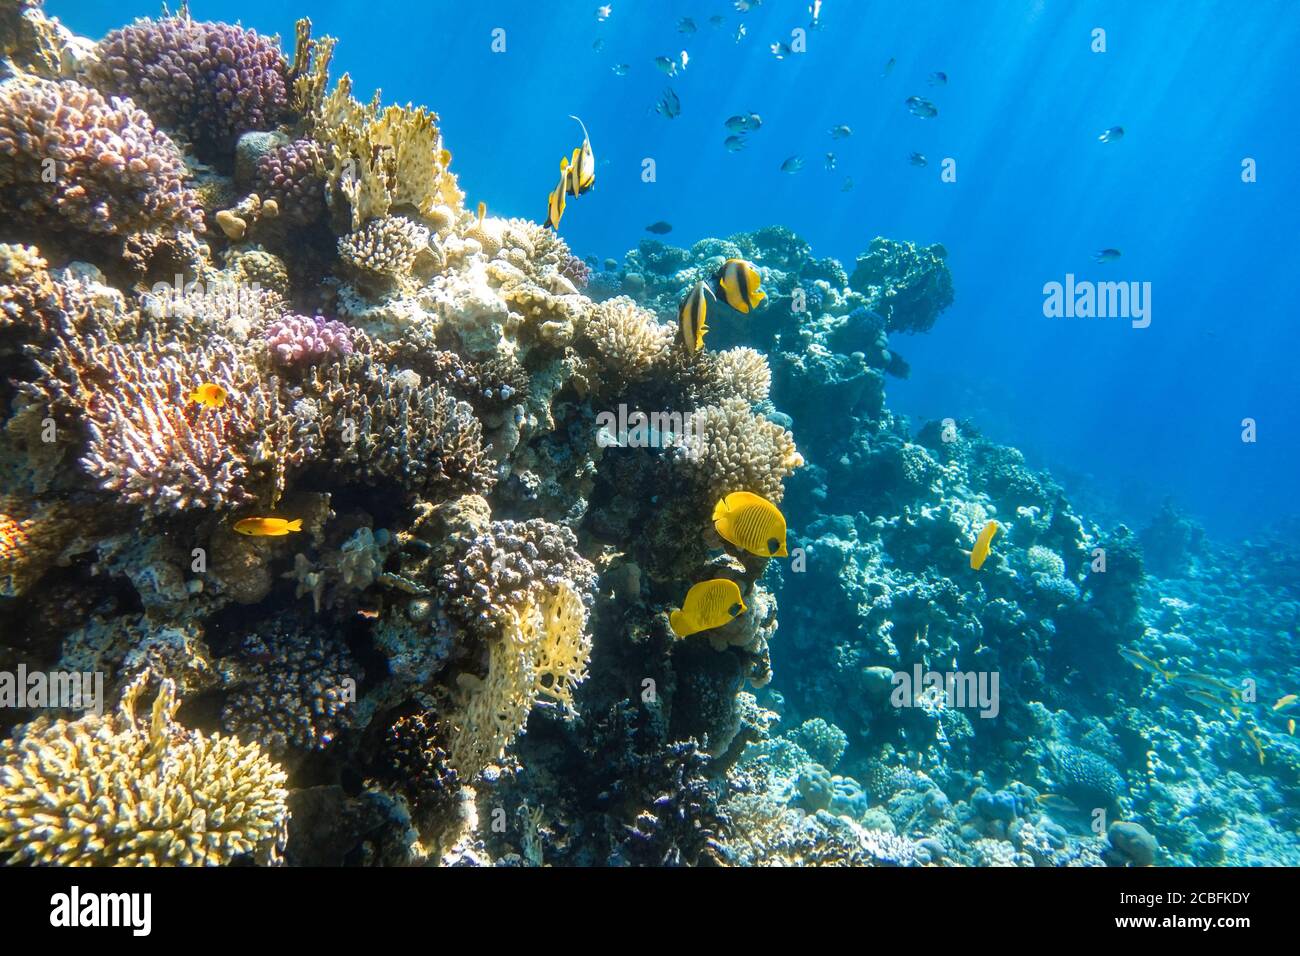 Butterflyfish (Chaetodon) In a Coral Reef, Red Sea, Egypt. Bright Yellow Striped Tropical Fish In The Ocean, Clear Blue Turquoise Water, Sun Rays. Und Stock Photo